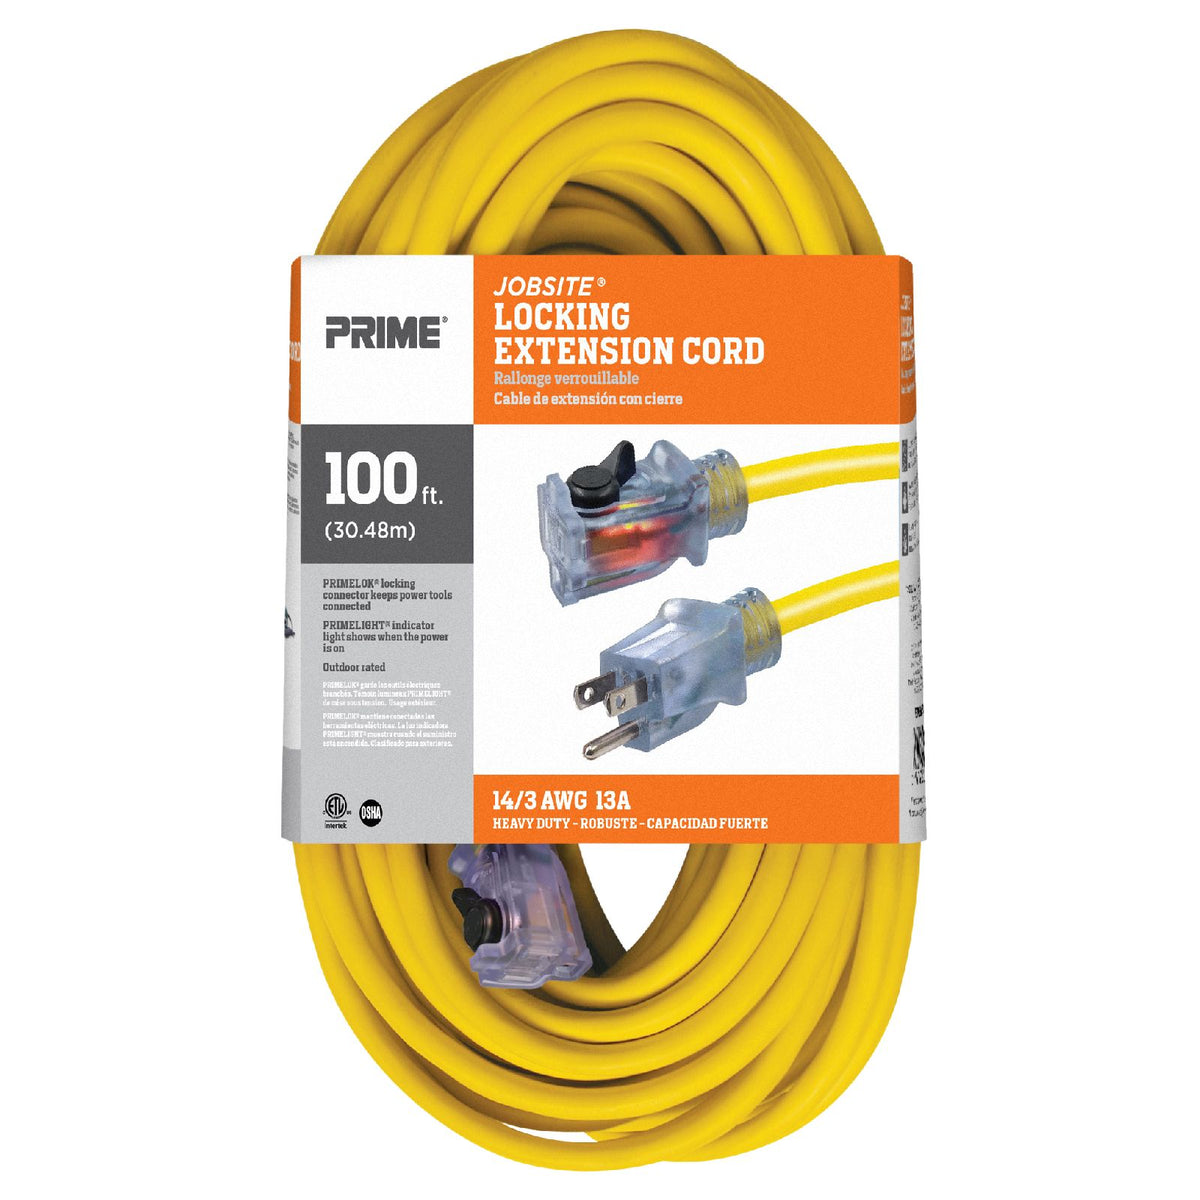 Southwire 100 ft. 14/3 SJTW Push-Lock Multi-Color Outdoor Medium-Duty Extension  Cord 24398826 - The Home Depot